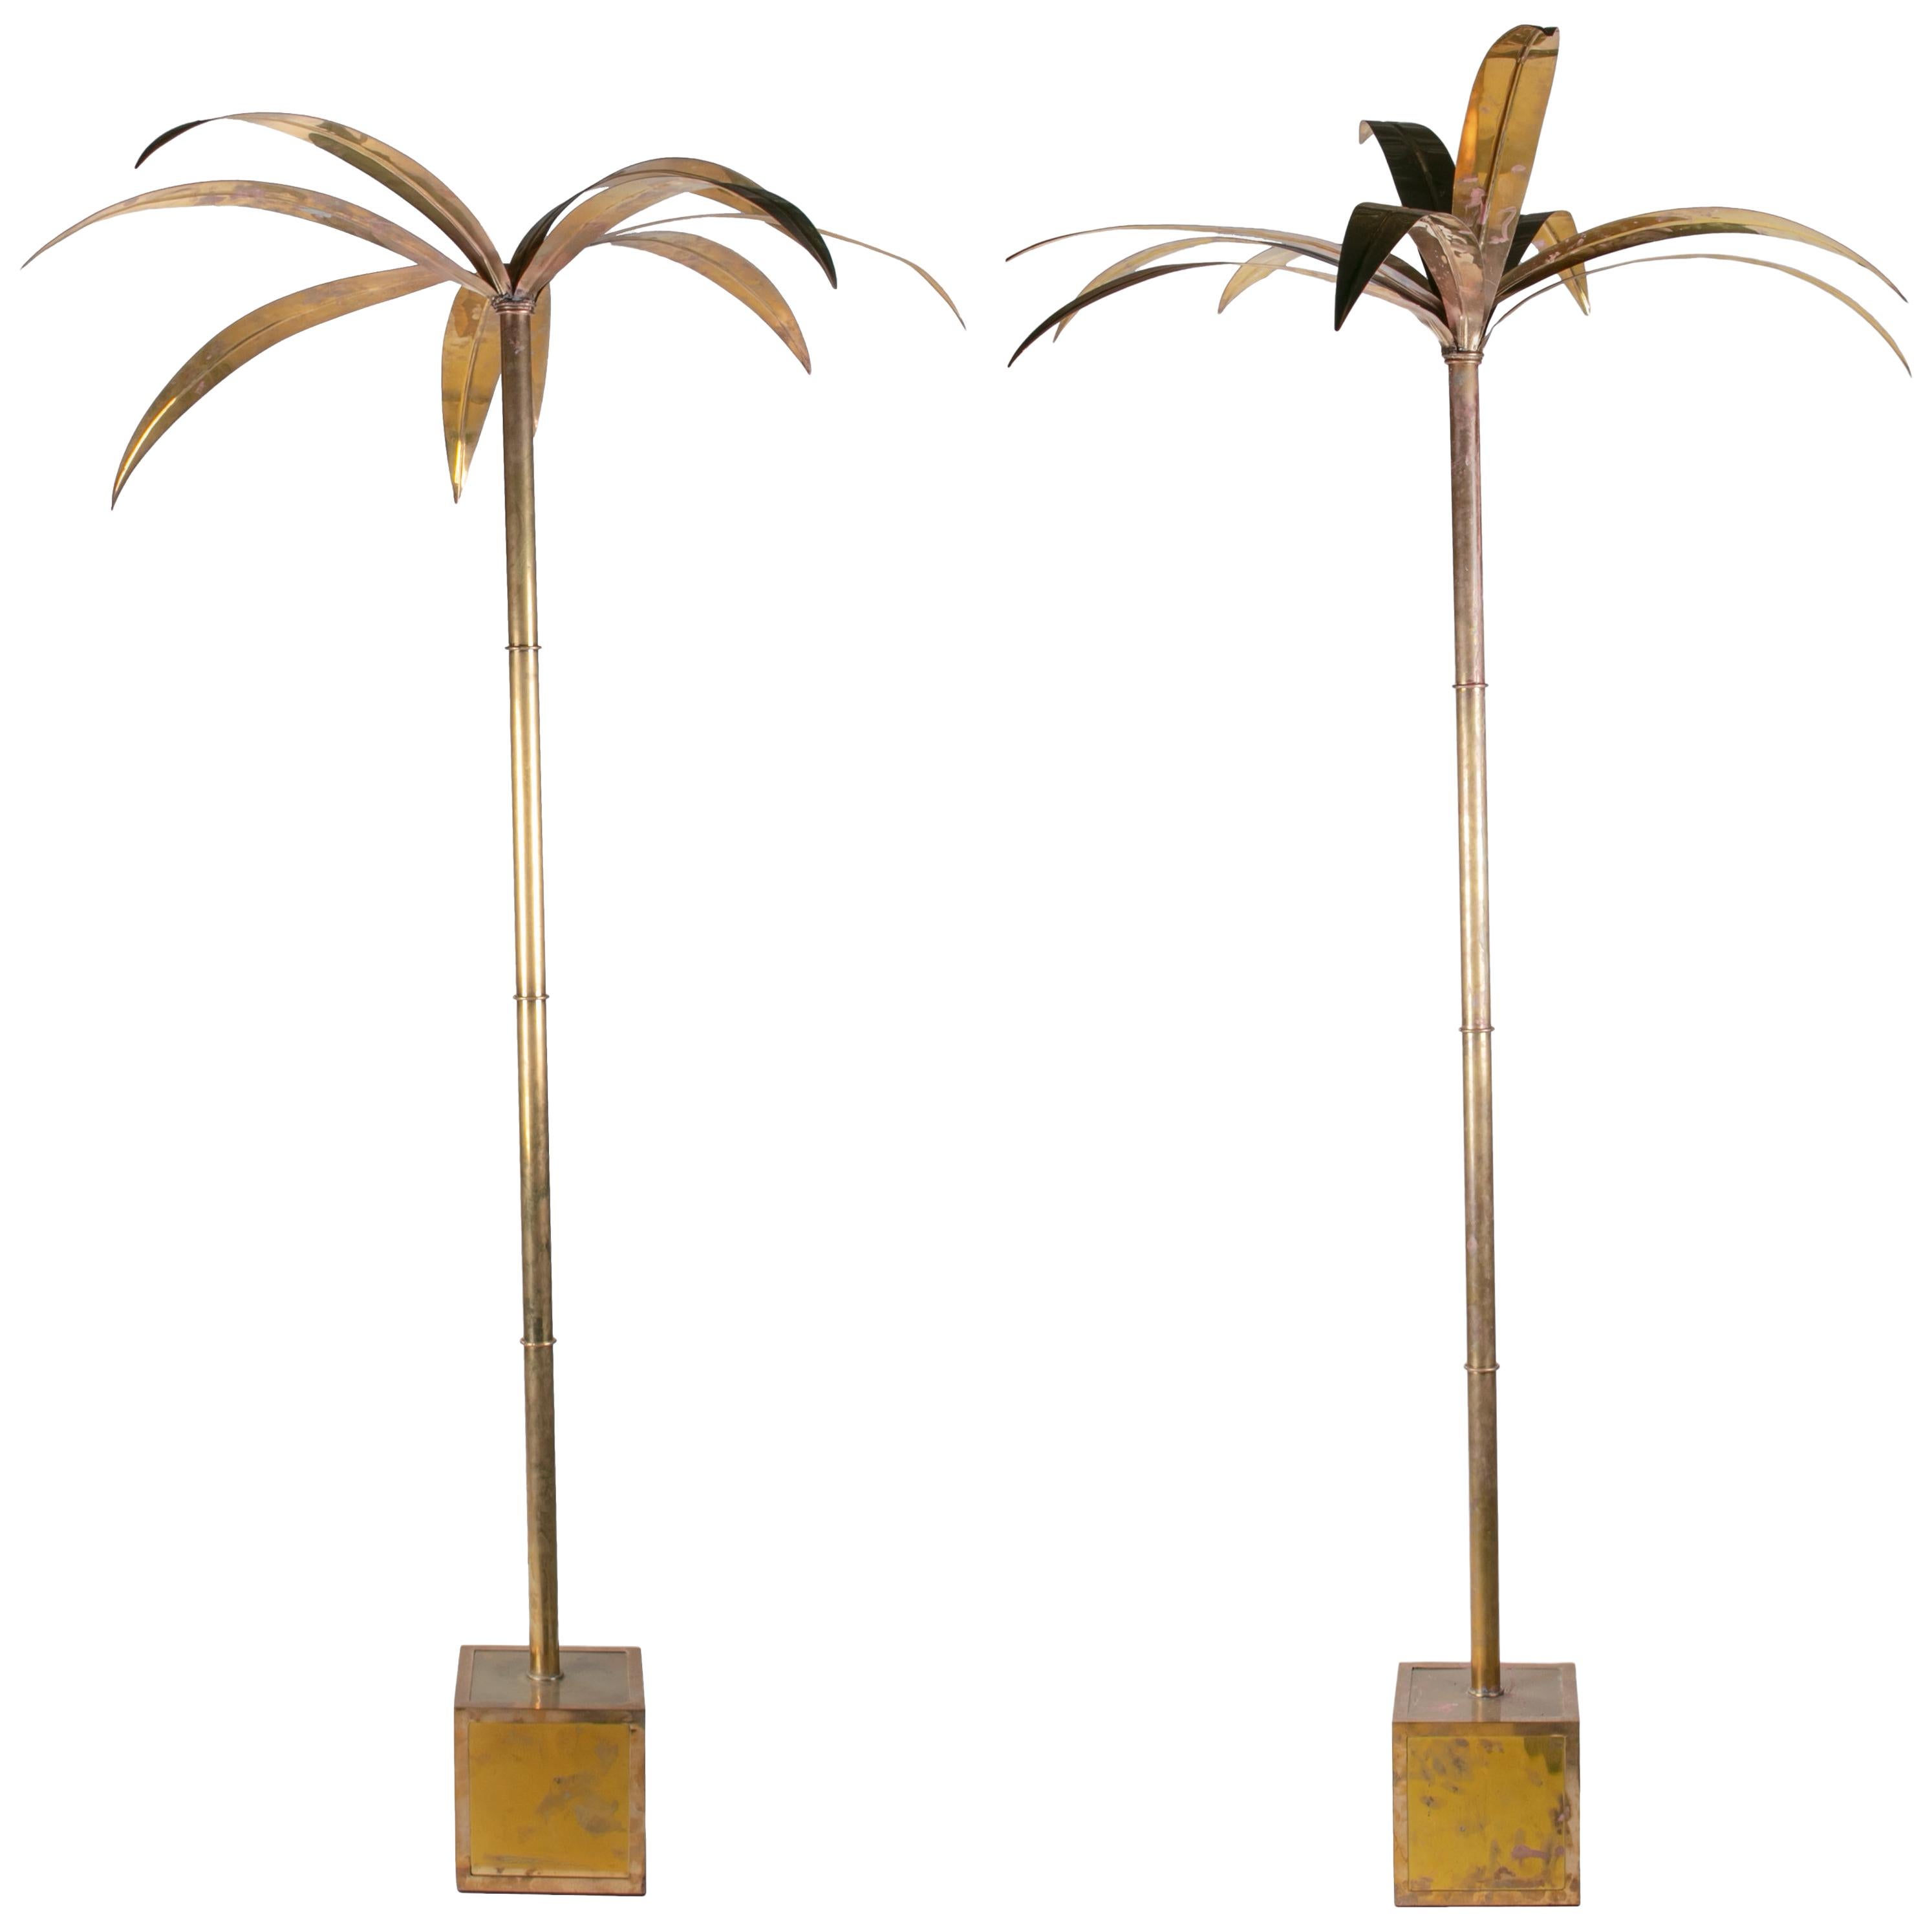 Pair of bronze golden french palm trees in a square base.